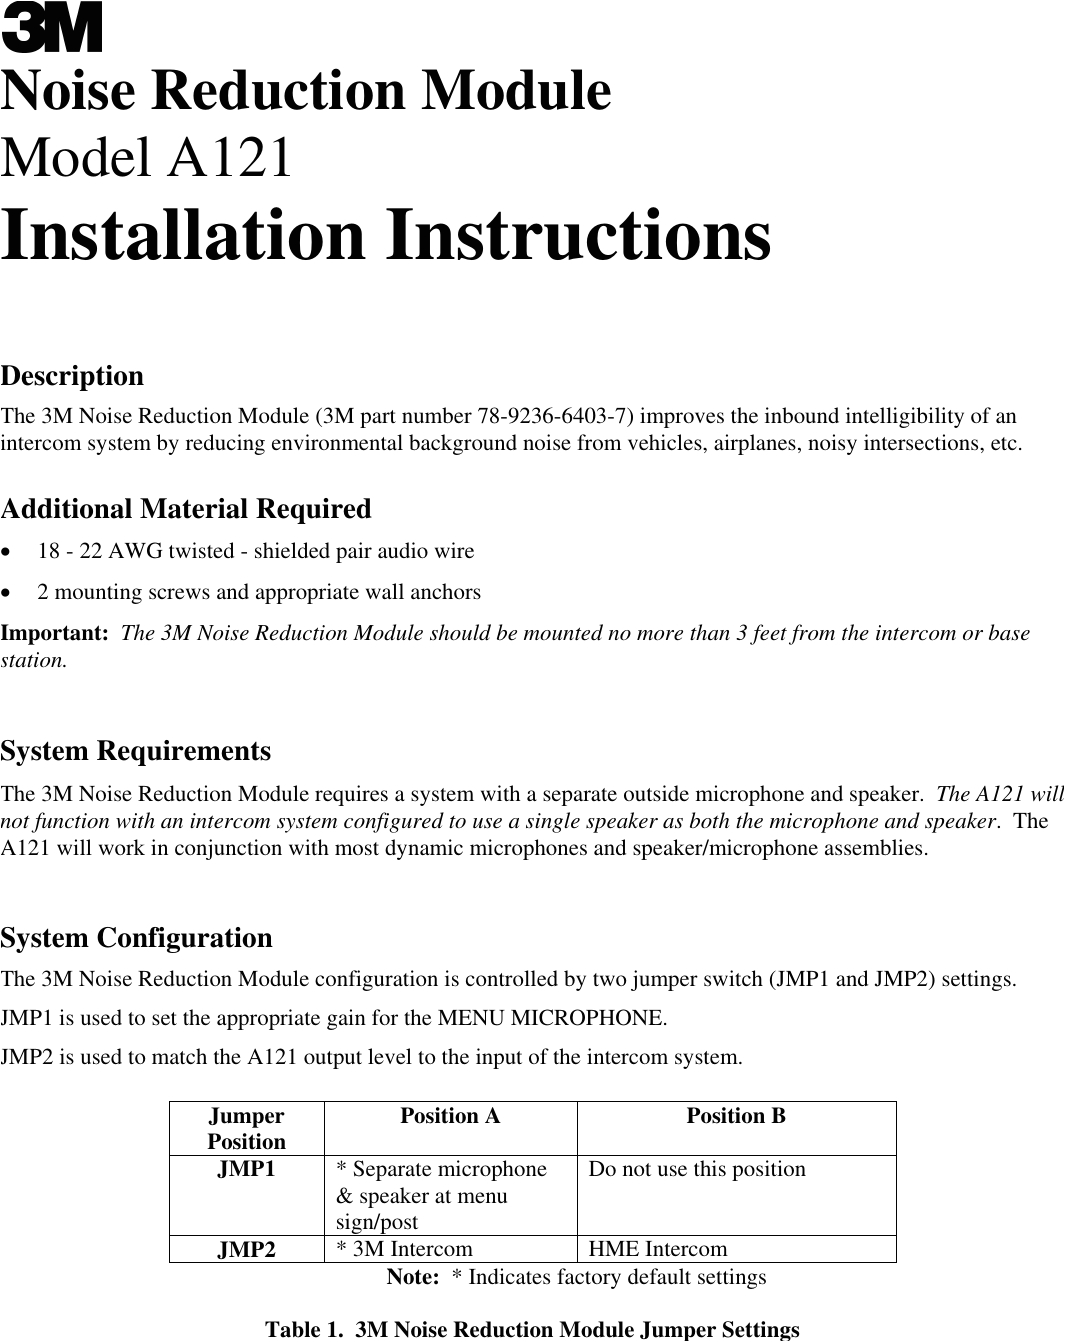 3ma121ownersmanual135723 1895017074 user guide page 1 png